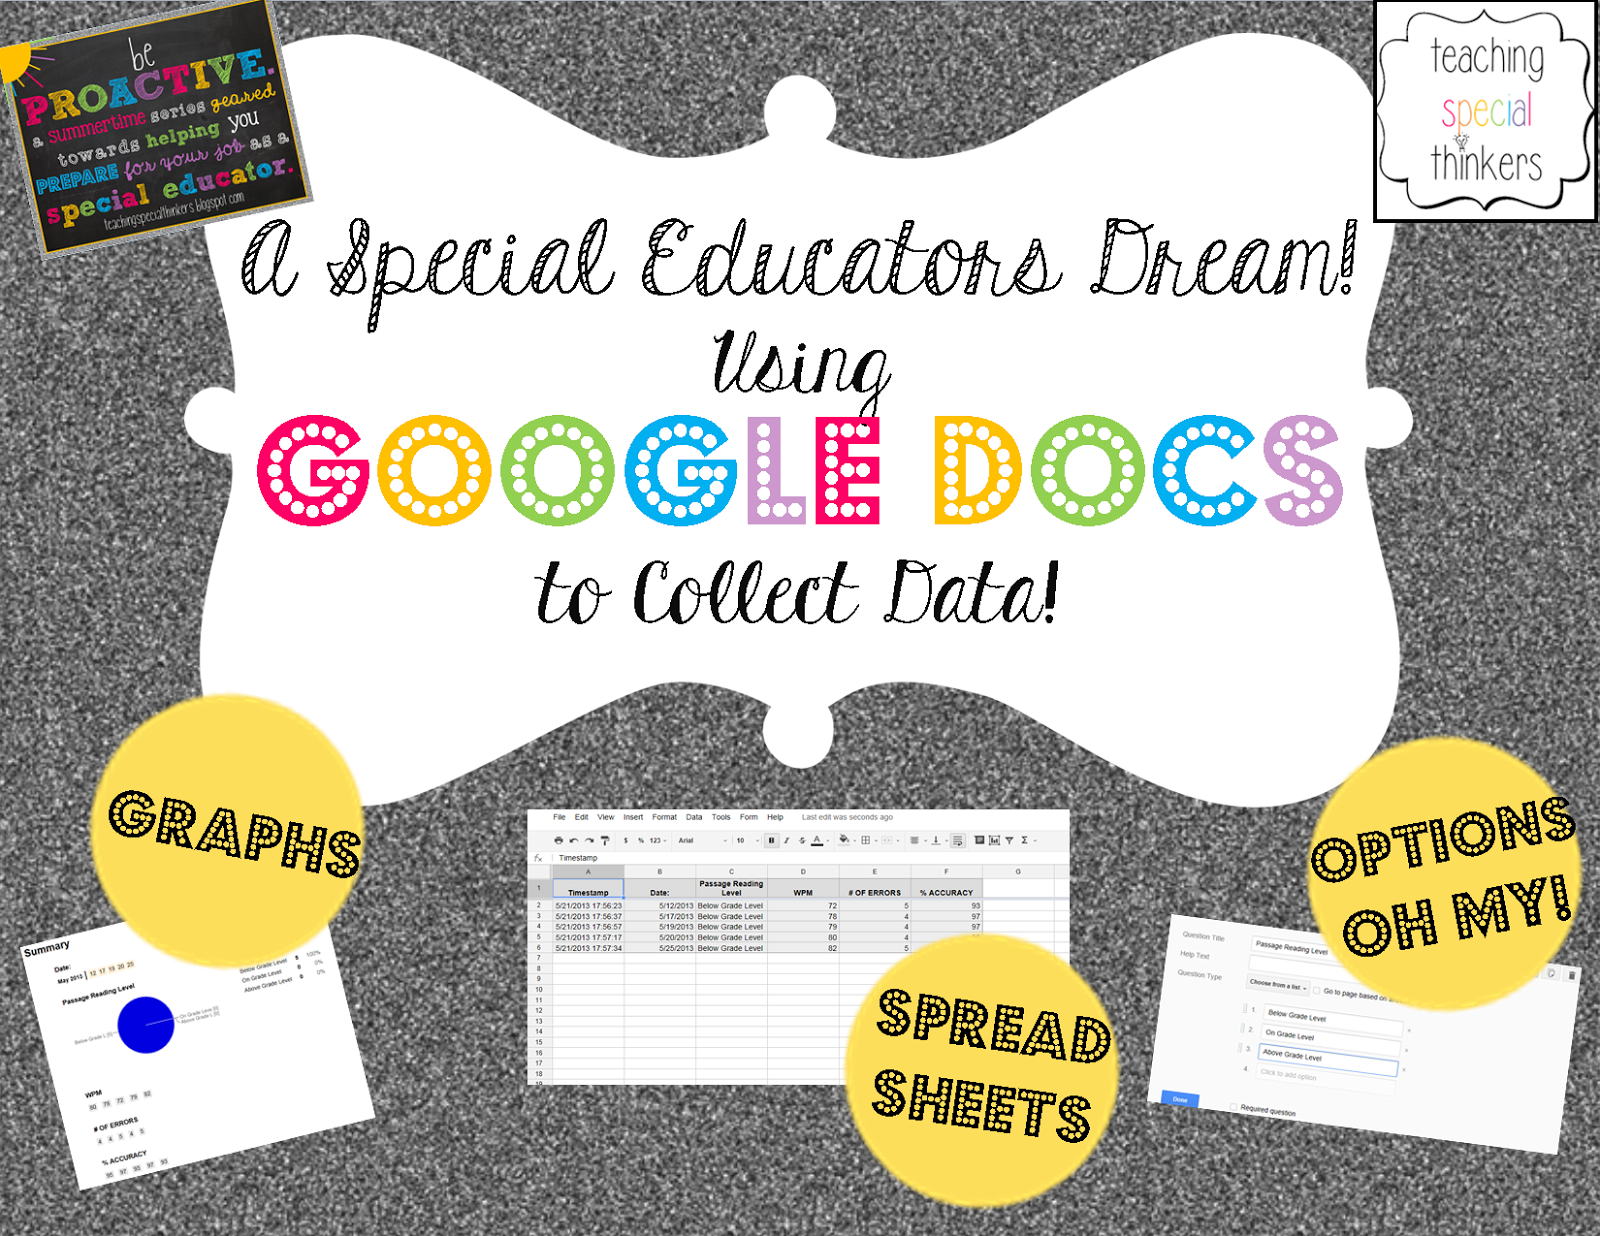 Teaching Special Thinkers: Be Proactive: Using Google Docs to Collect Data for IEP Goals!